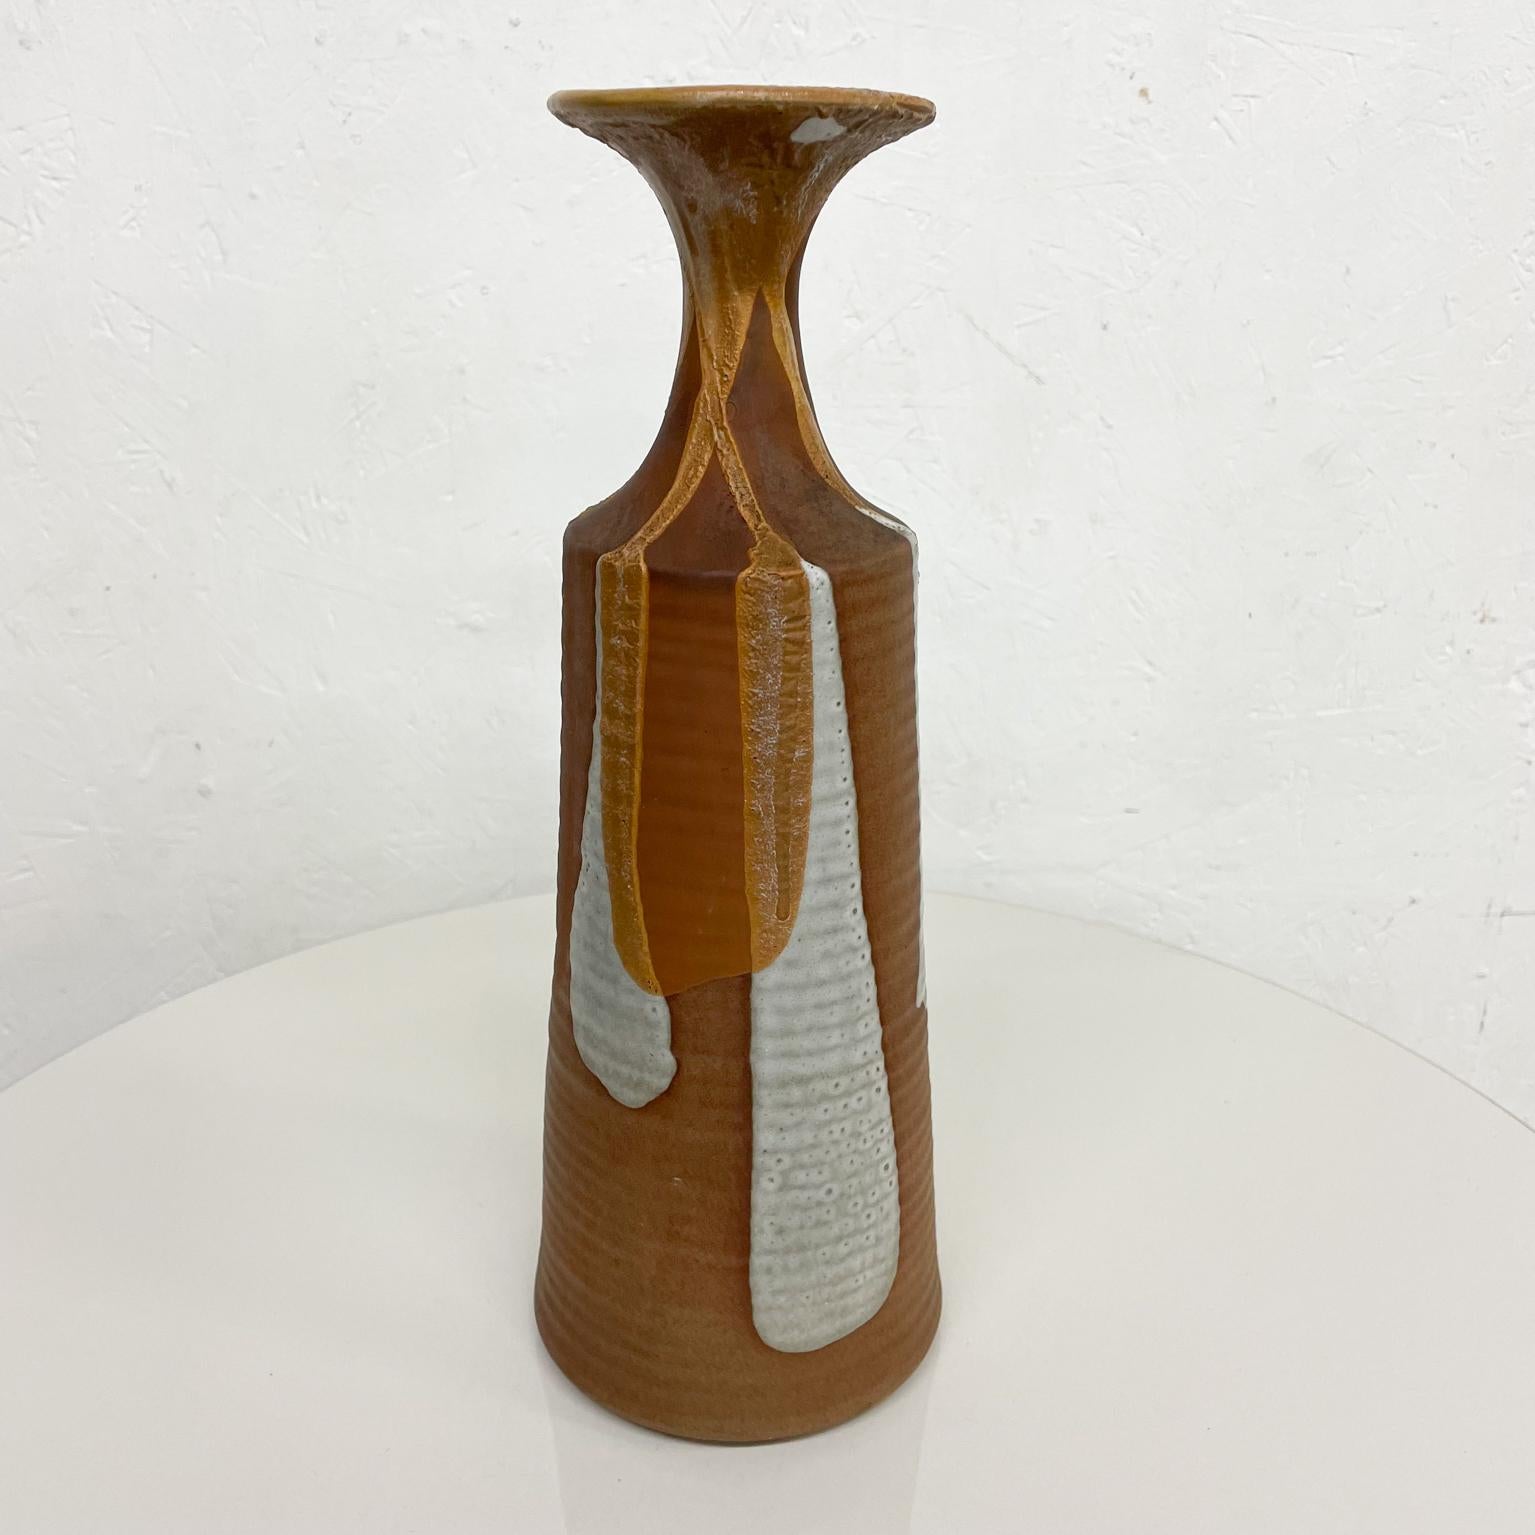 Modern Art Sculptural Studio Pottery Vase Warm Colors David Cressey Style 1970s In Good Condition For Sale In Chula Vista, CA